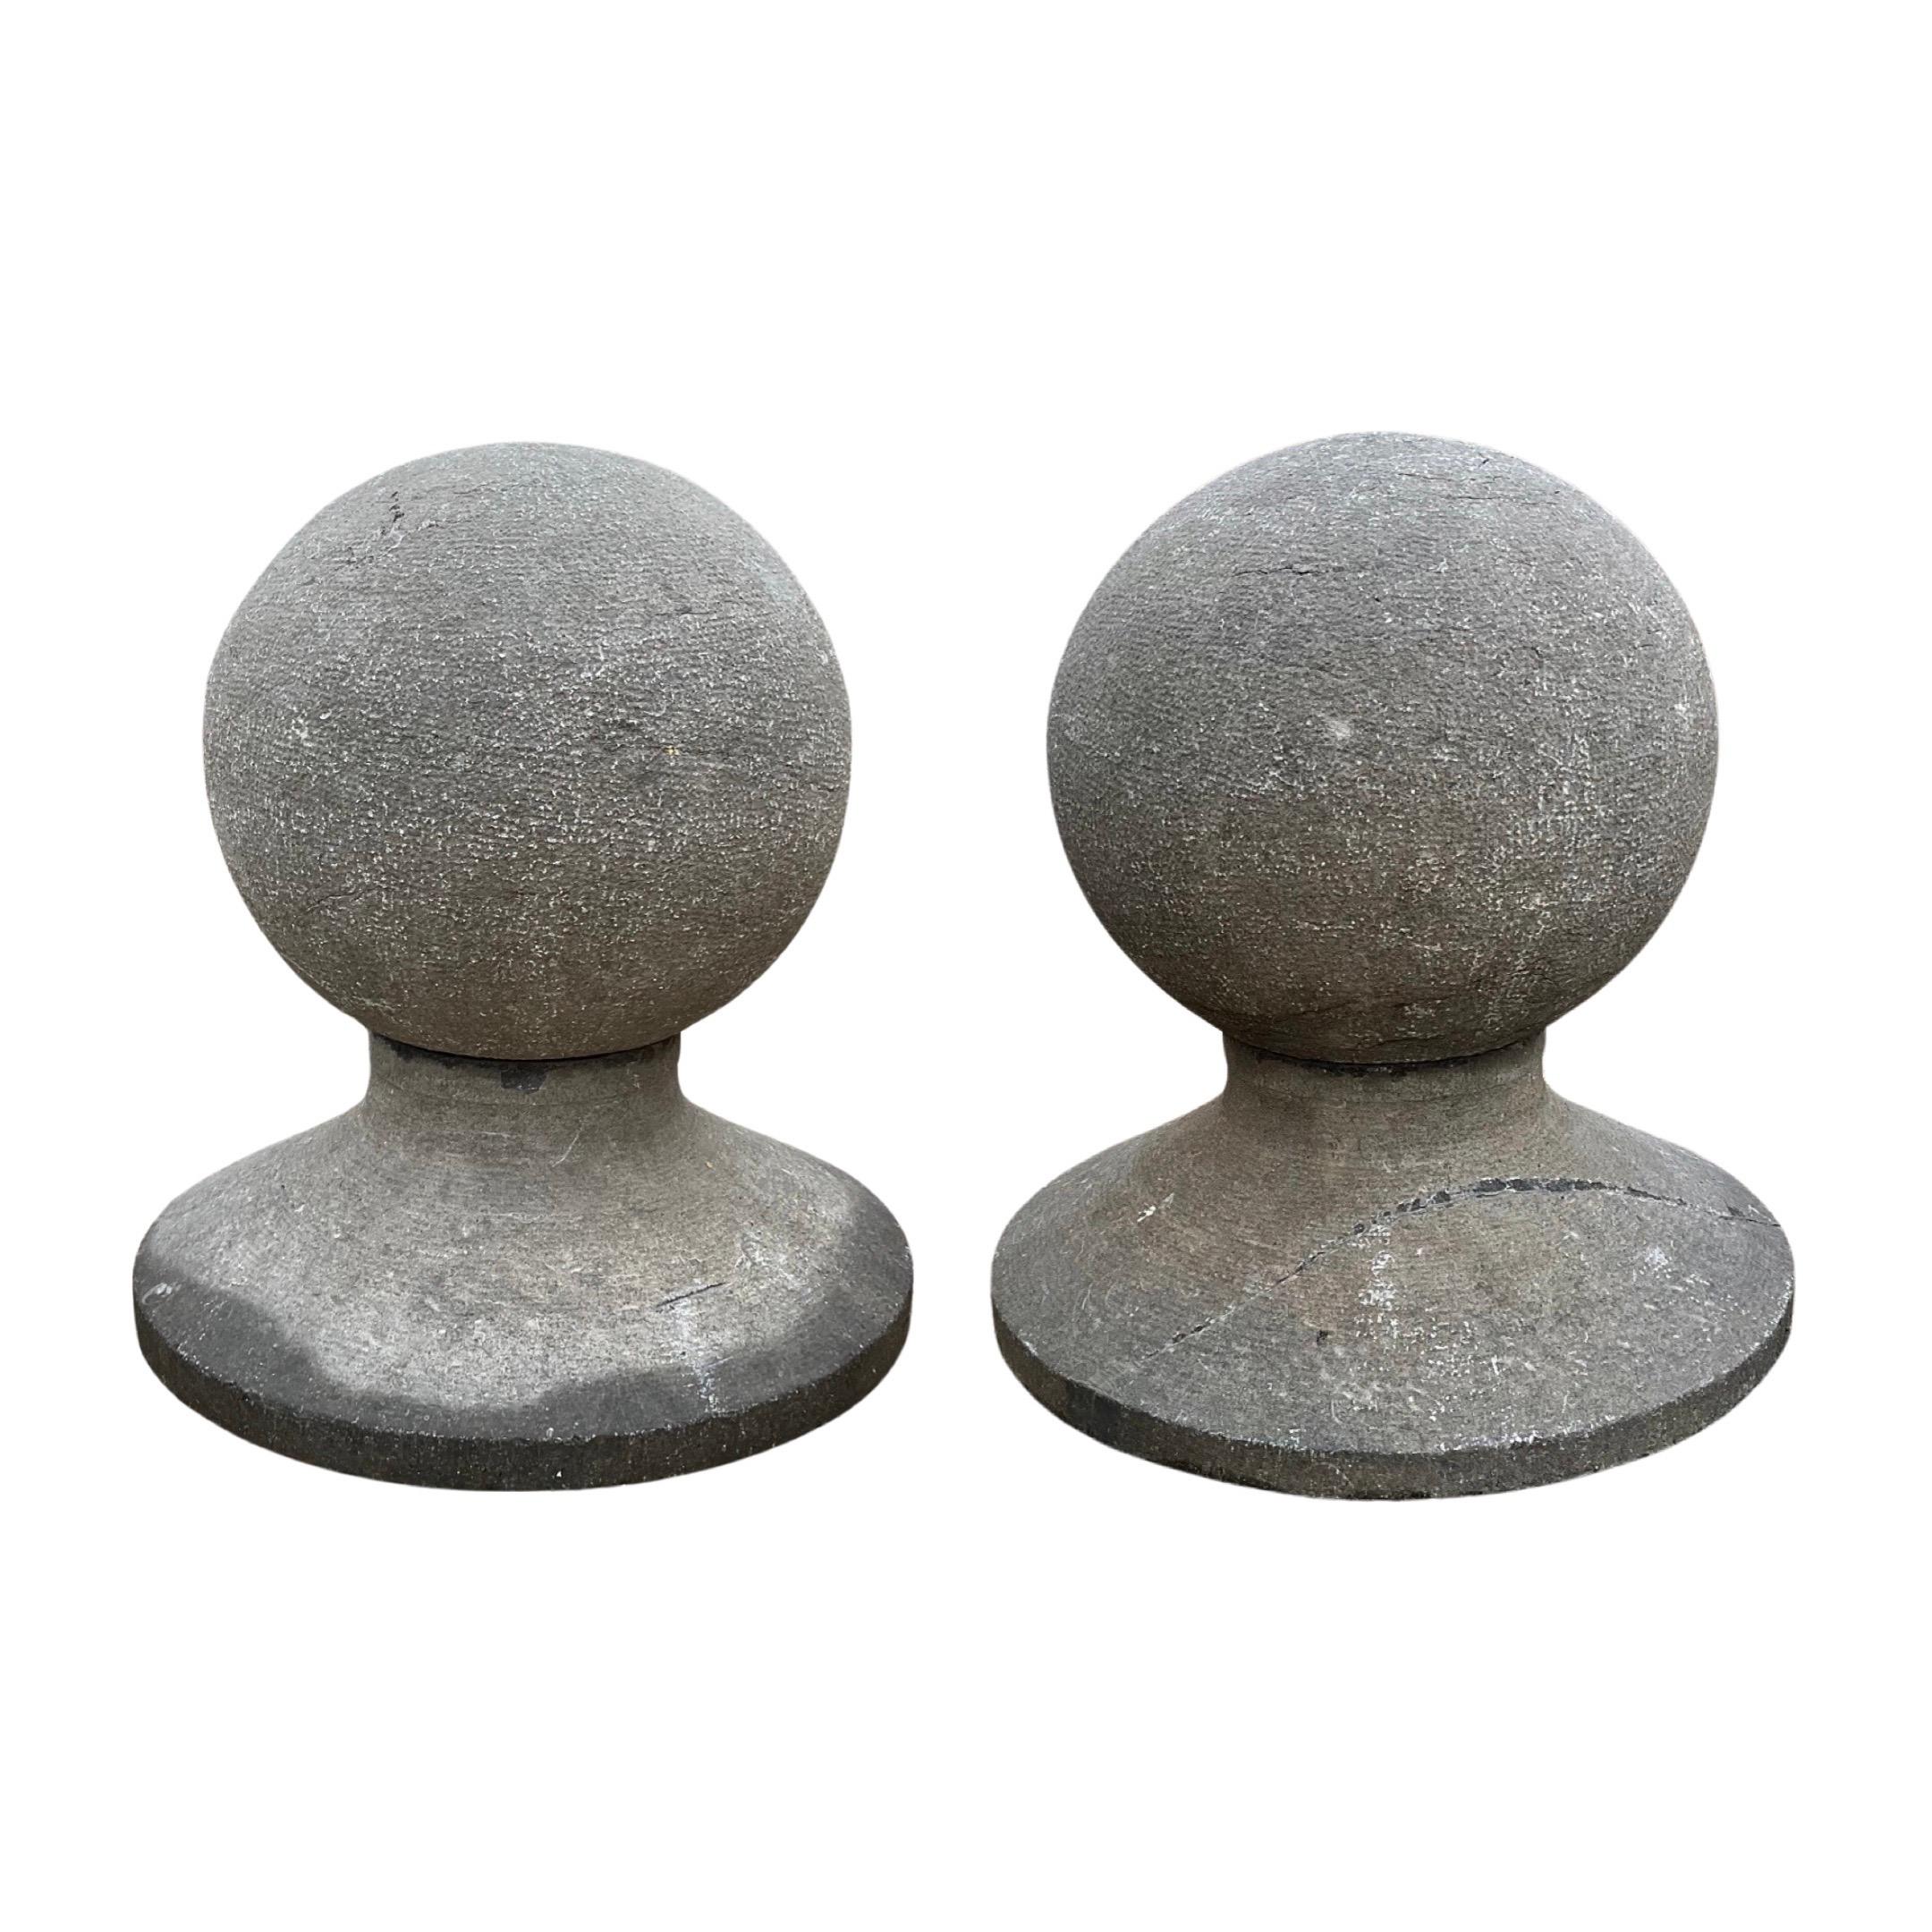 These Belgian Bluestone Circular Finials are expertly crafted from 18th century bluestone, originating from Belgium. Sold as a pair, the round circular style finials and base add a touch of elegance to any architectural design or landscaping